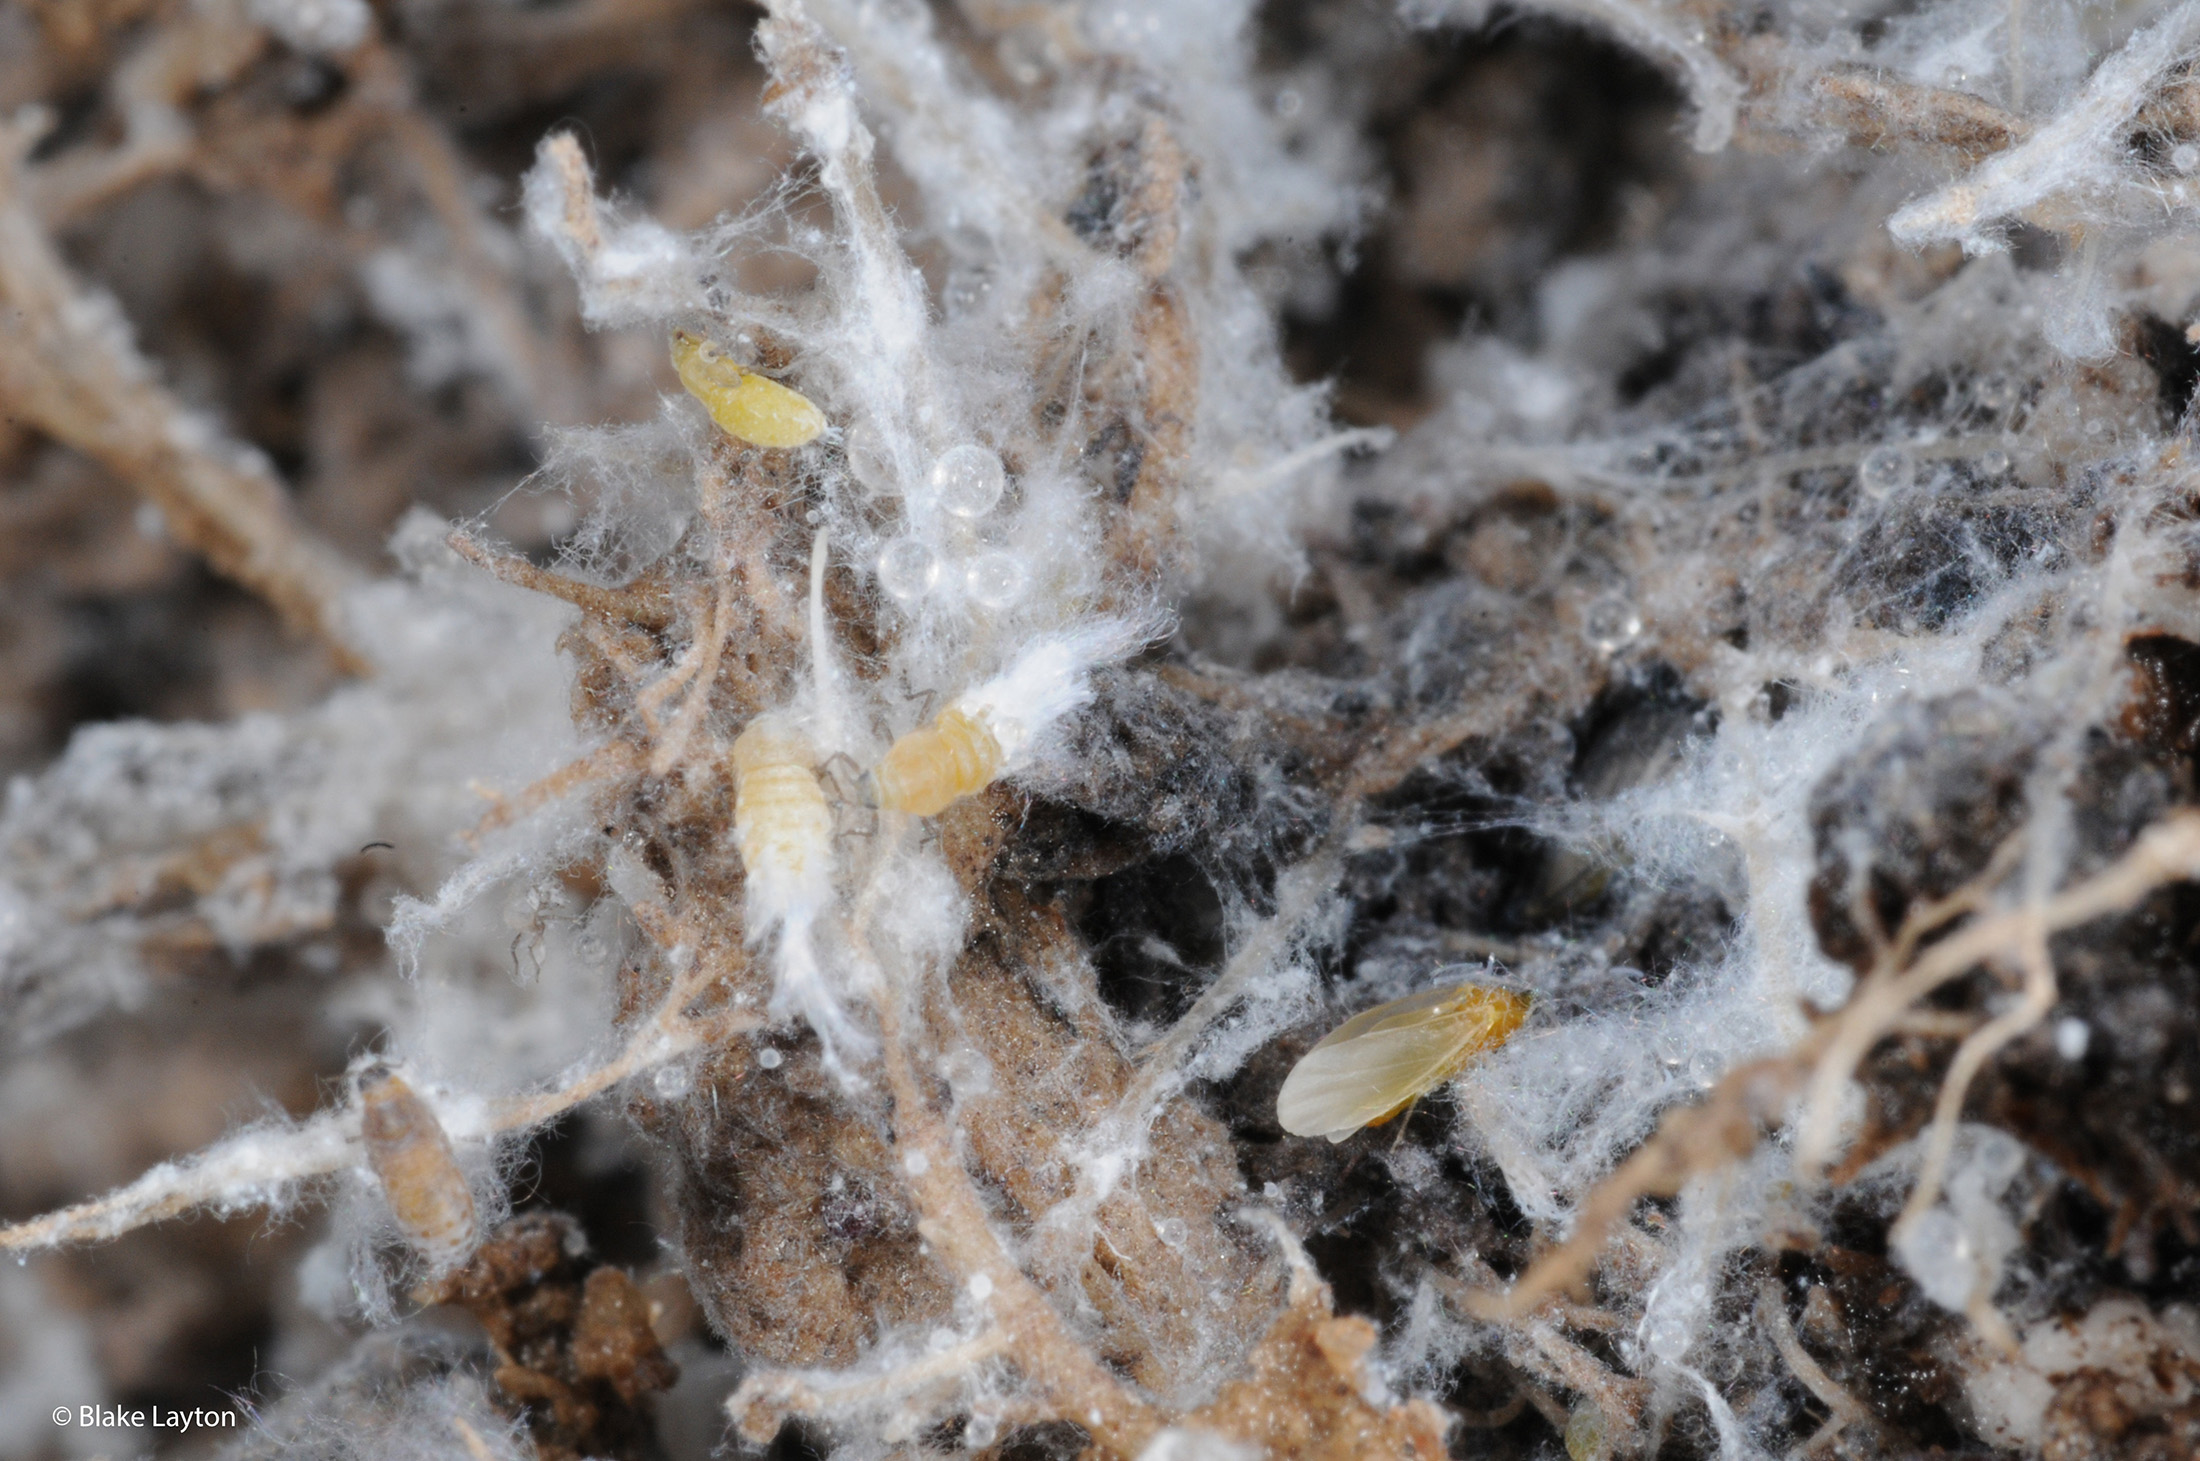 Tiny, pale yellow aphids that produce a white, cottony material on roots.